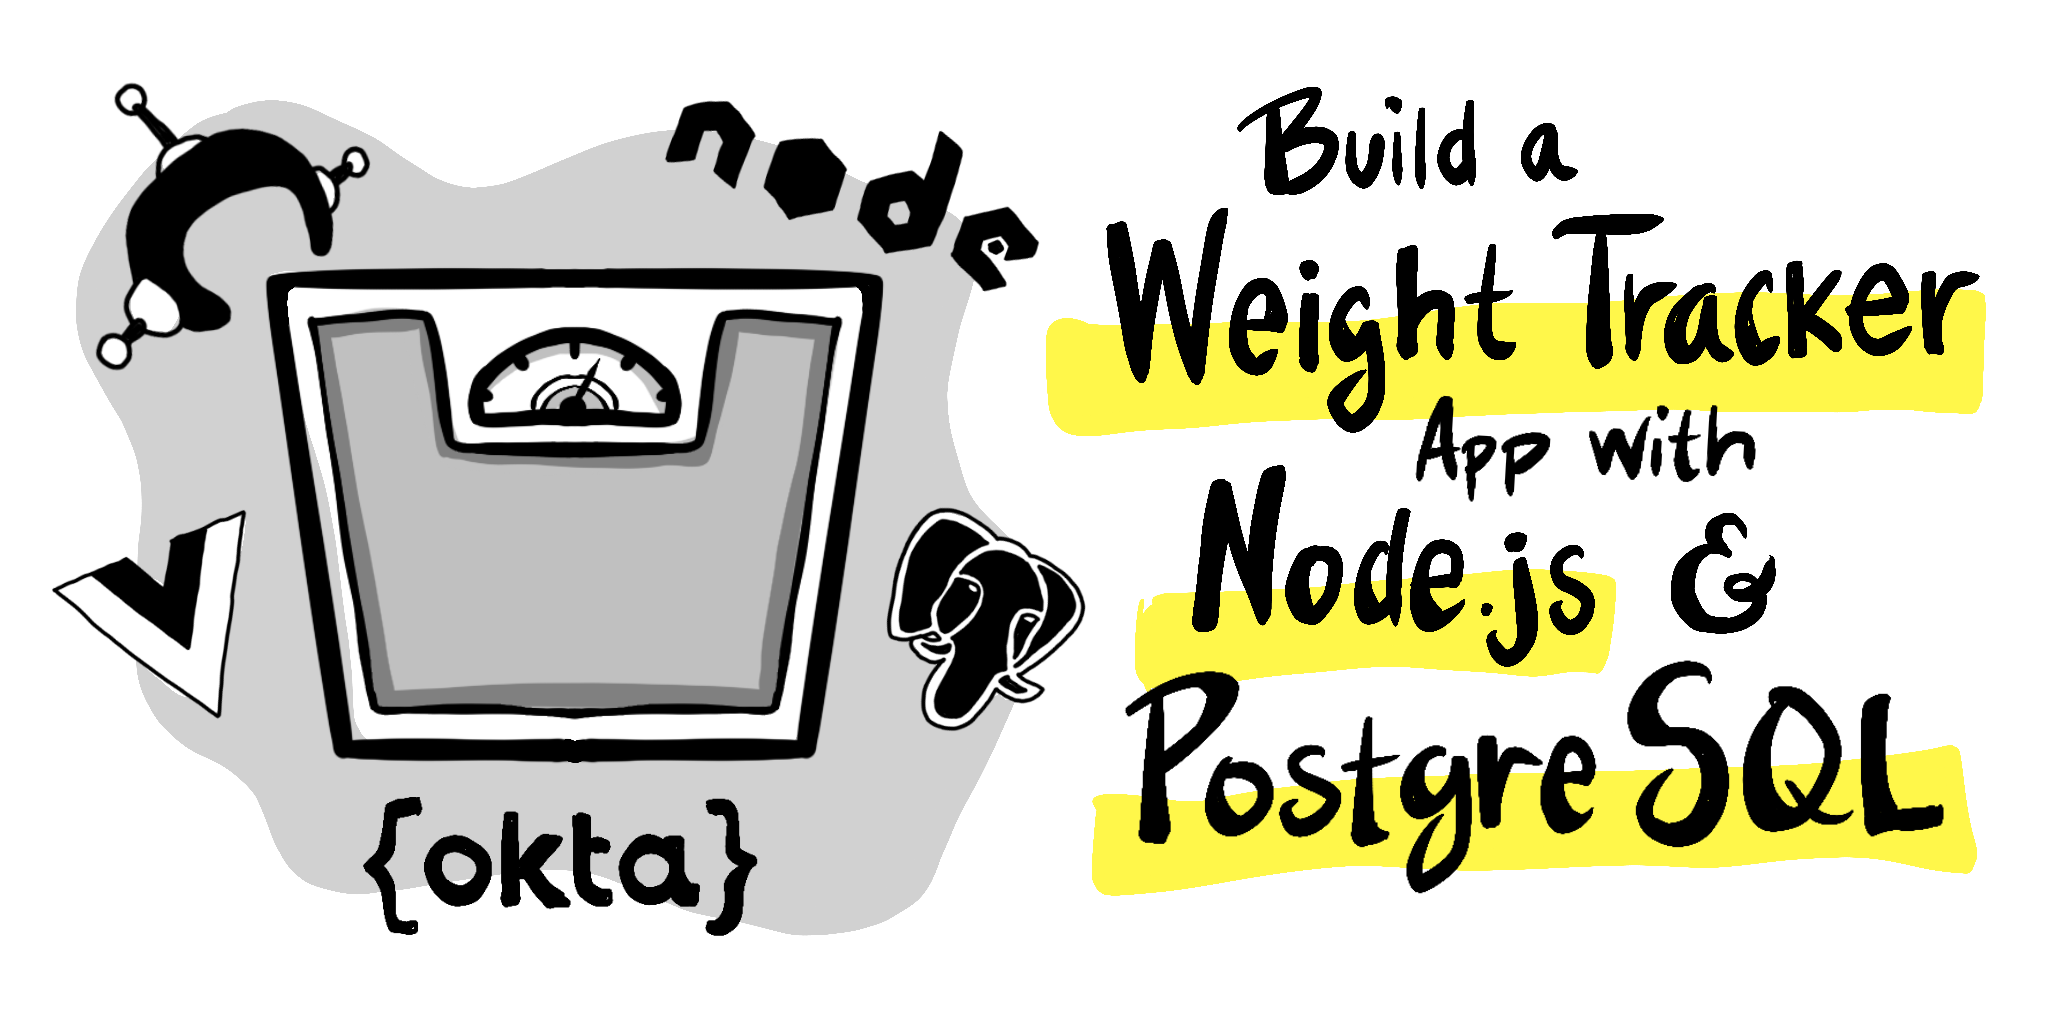 Build a Weight Tracker App with Node.js and PostgreSQL